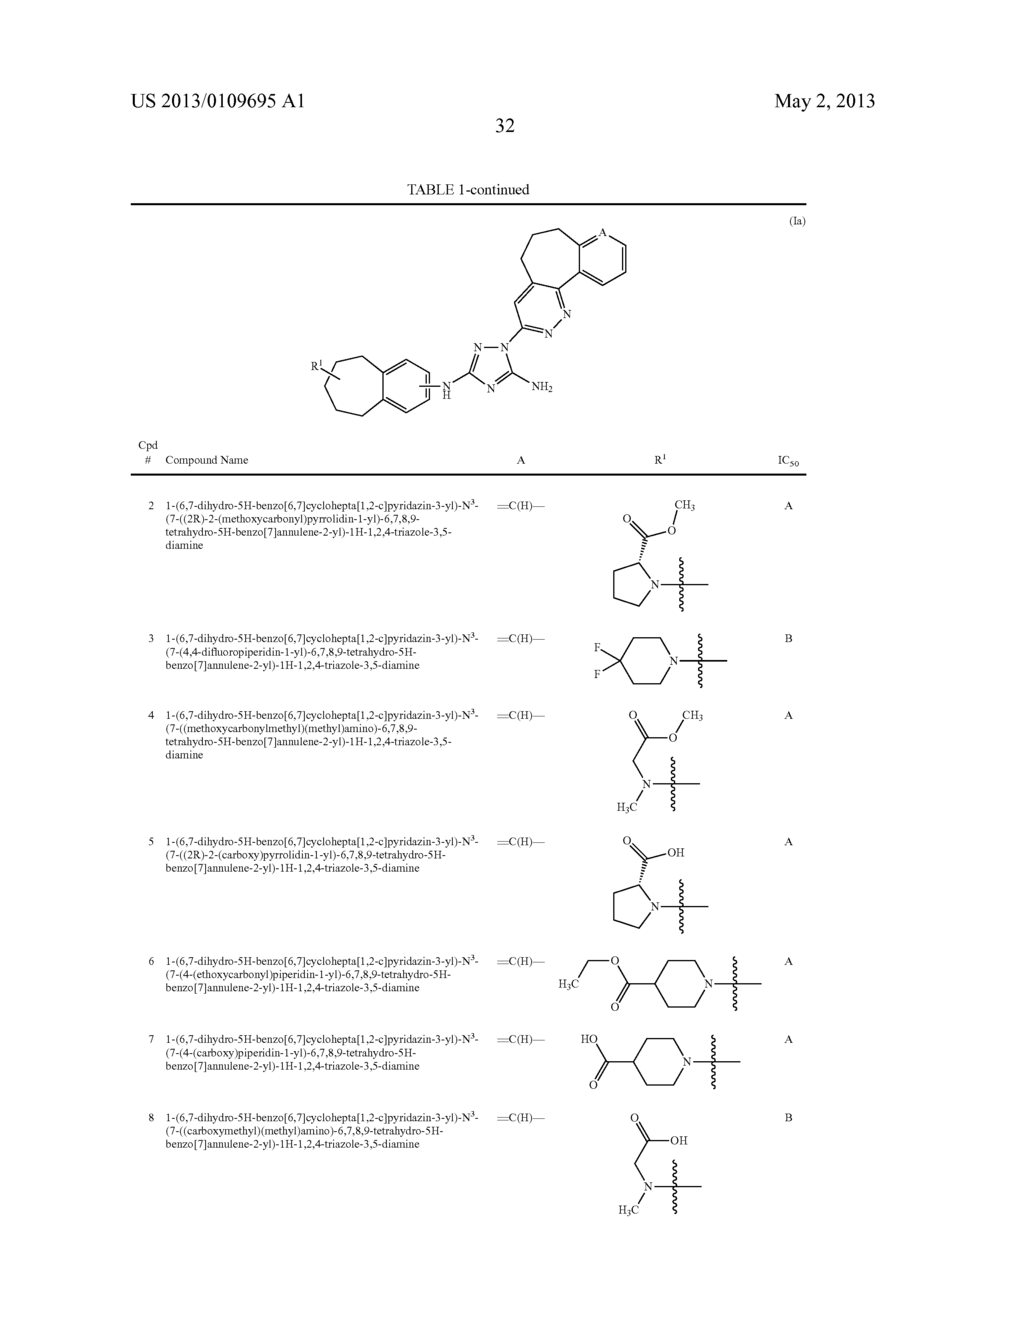 POLYCYCLIC HETEROARYL SUBSTITUTED TRIAZOLES USEFUL AS AXL INHIBITORS - diagram, schematic, and image 33